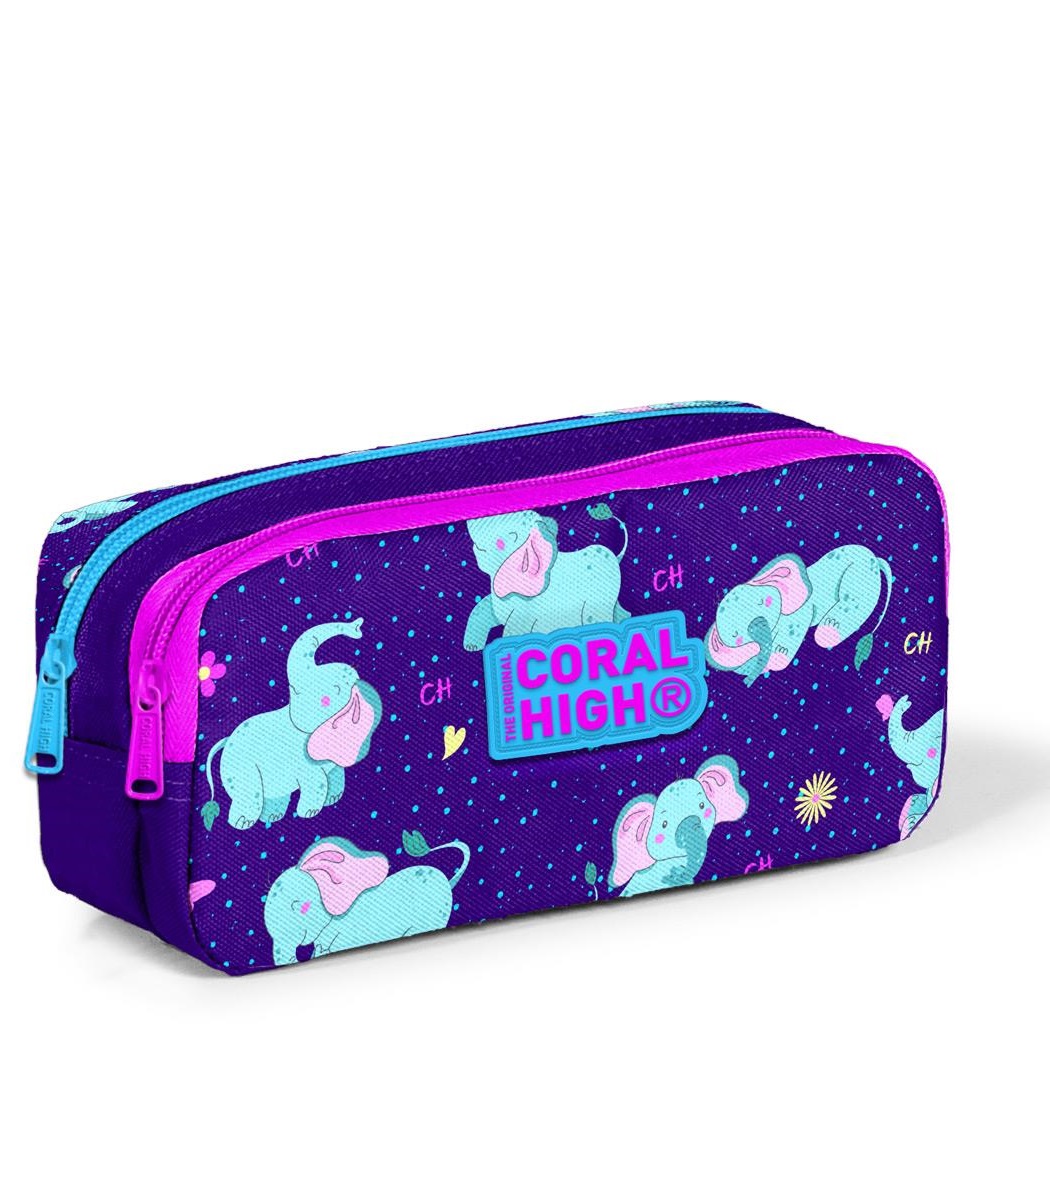 Coral High Kids Two Compartment Pencil case - Purple Pink Elephant Patterned